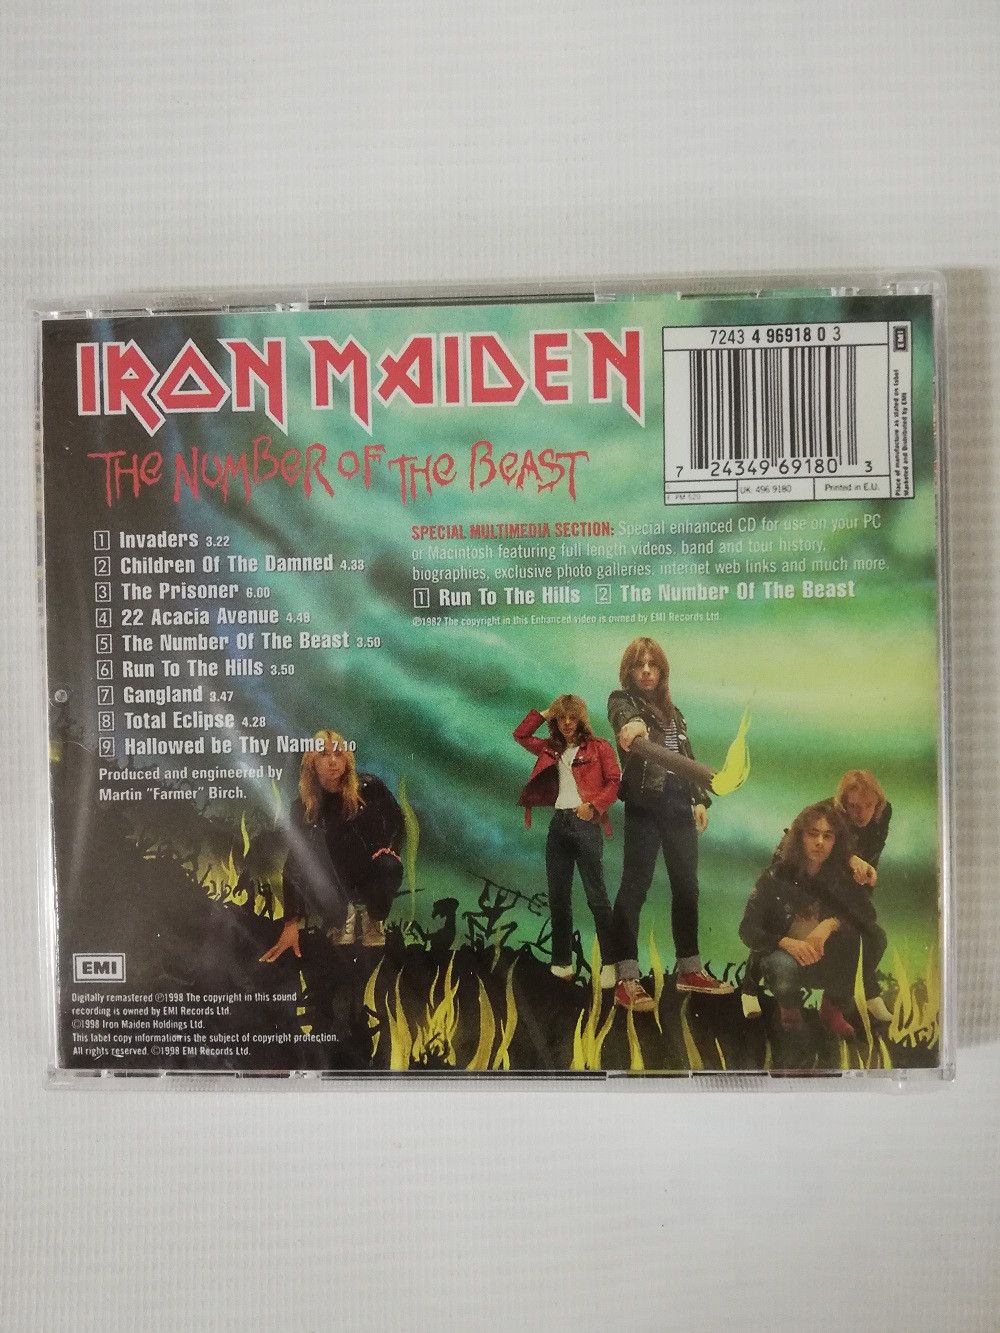 Imagen CD IRON MAIDEN - THE NUMBER OF THE BEAST  2